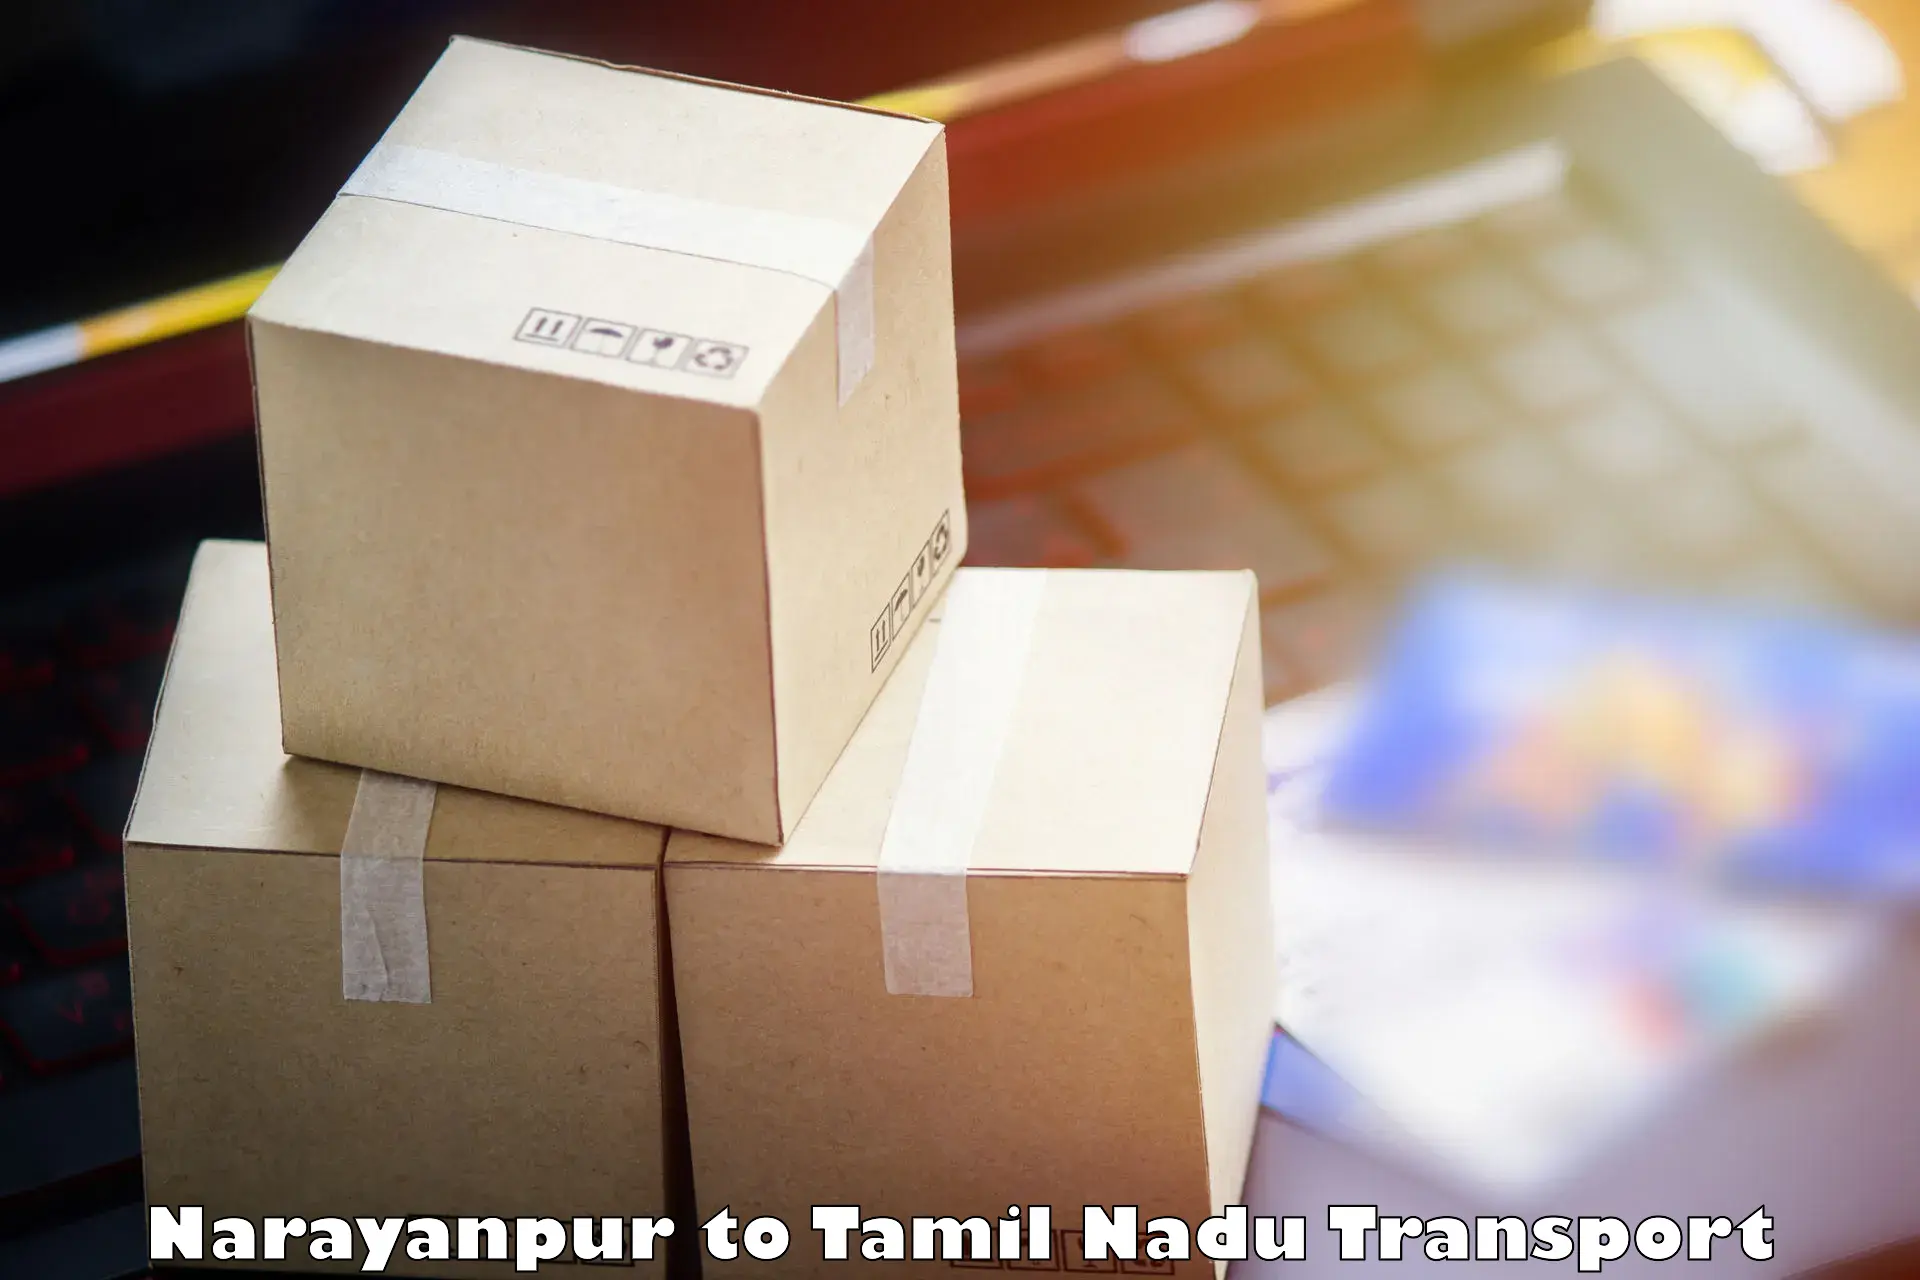 Shipping services Narayanpur to Meenakshi Academy of Higher Education and Research Chennai